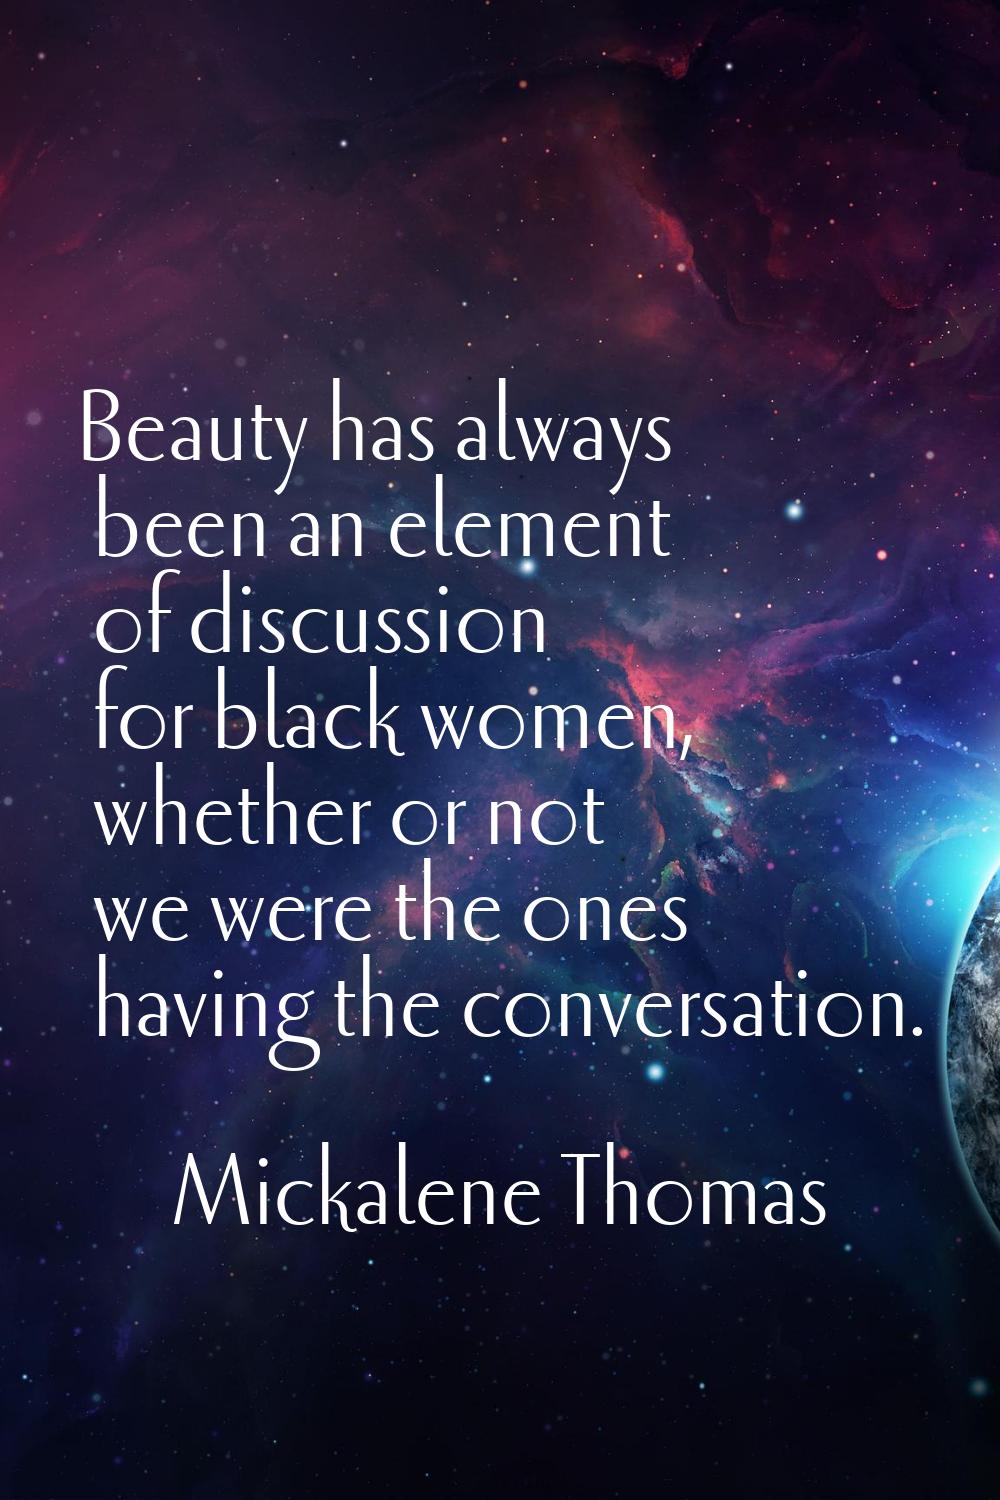 Beauty has always been an element of discussion for black women, whether or not we were the ones ha